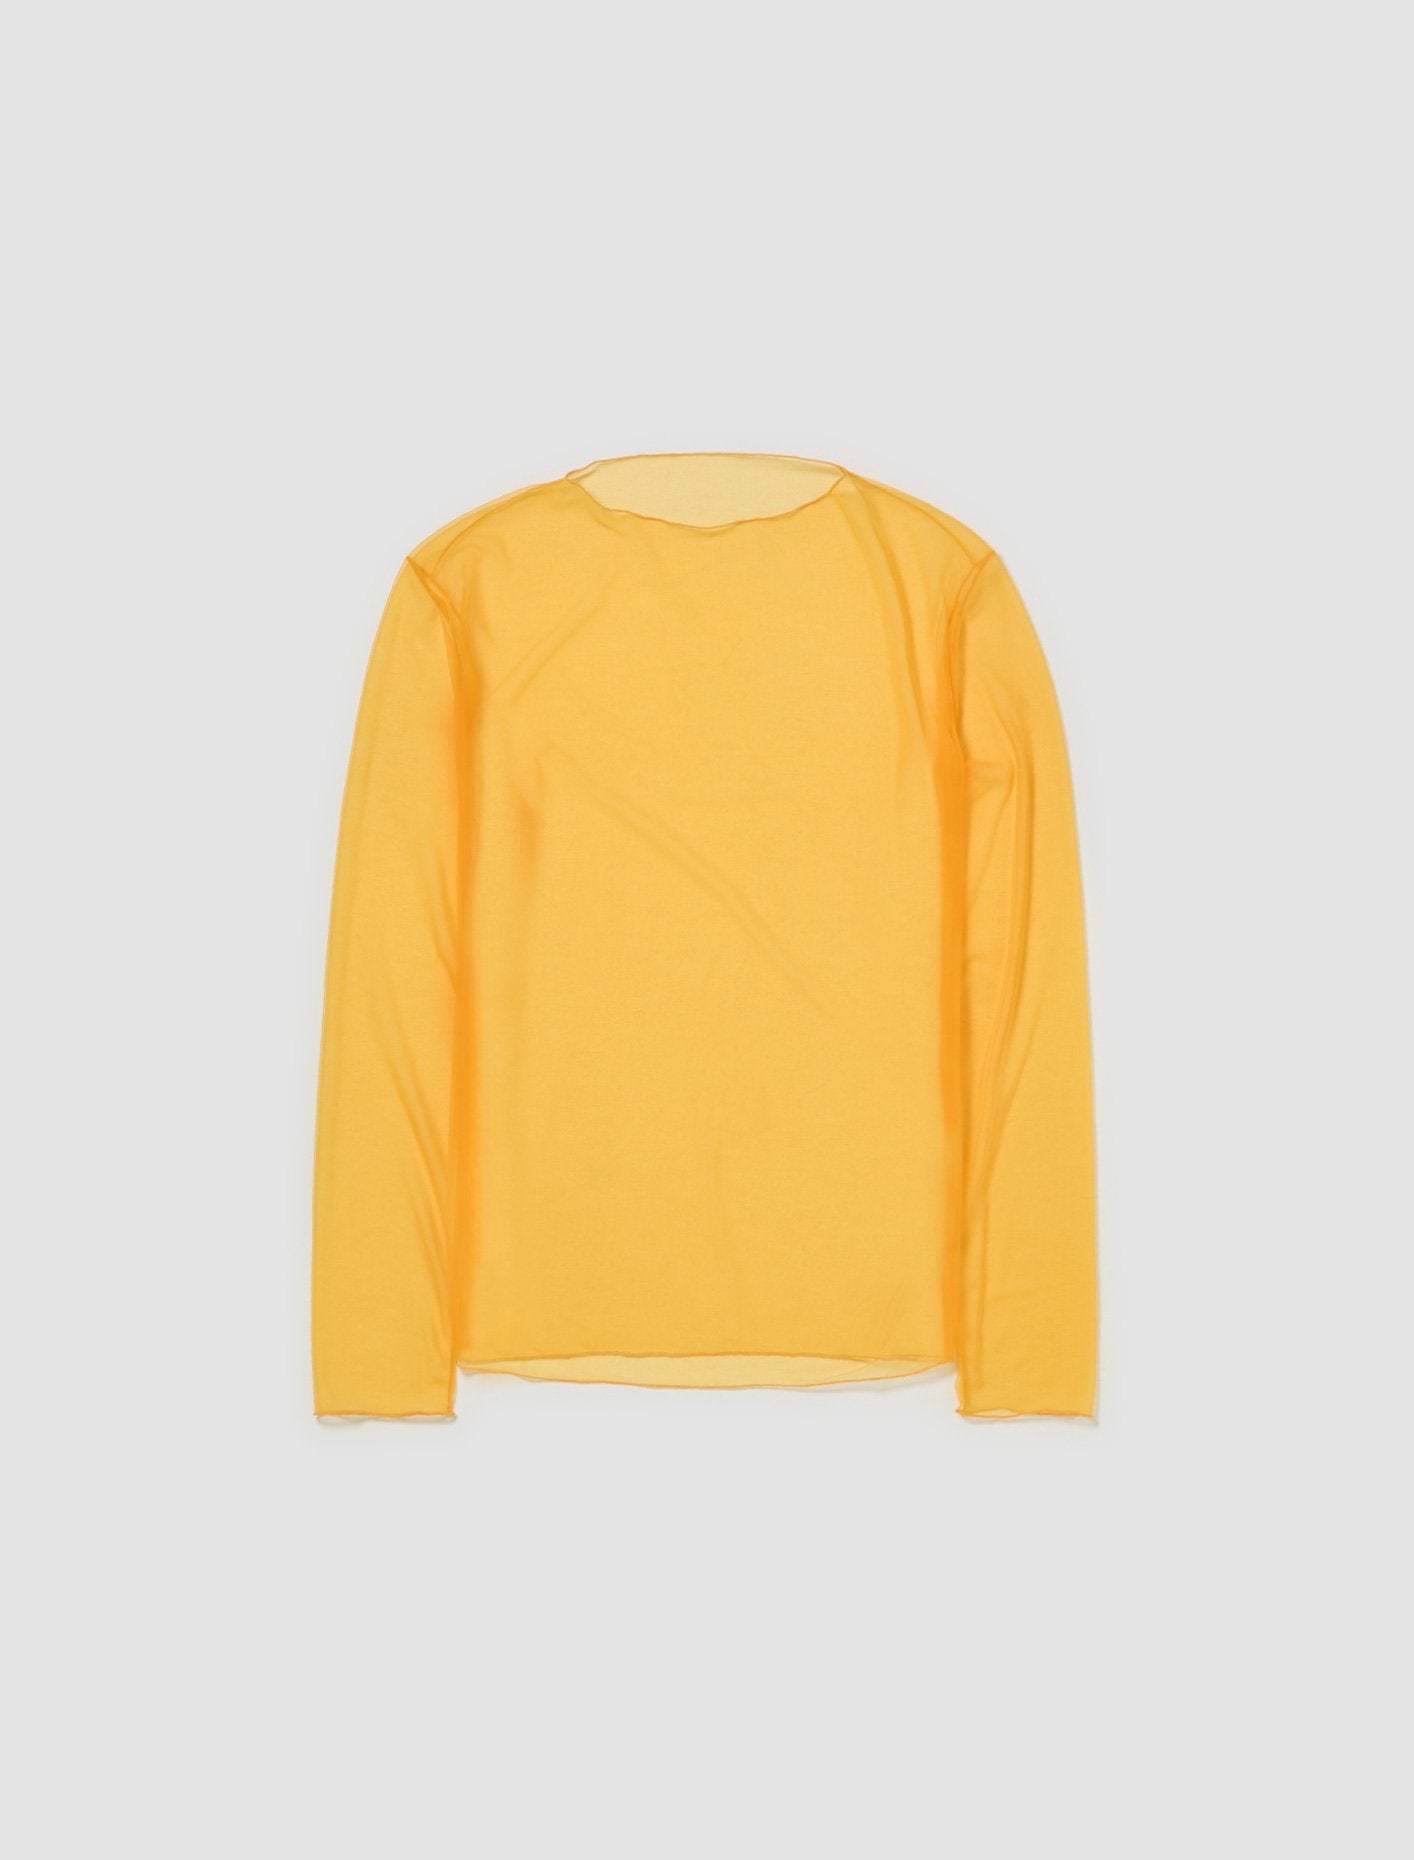 Double Layer Long Sleeved Top in Mango